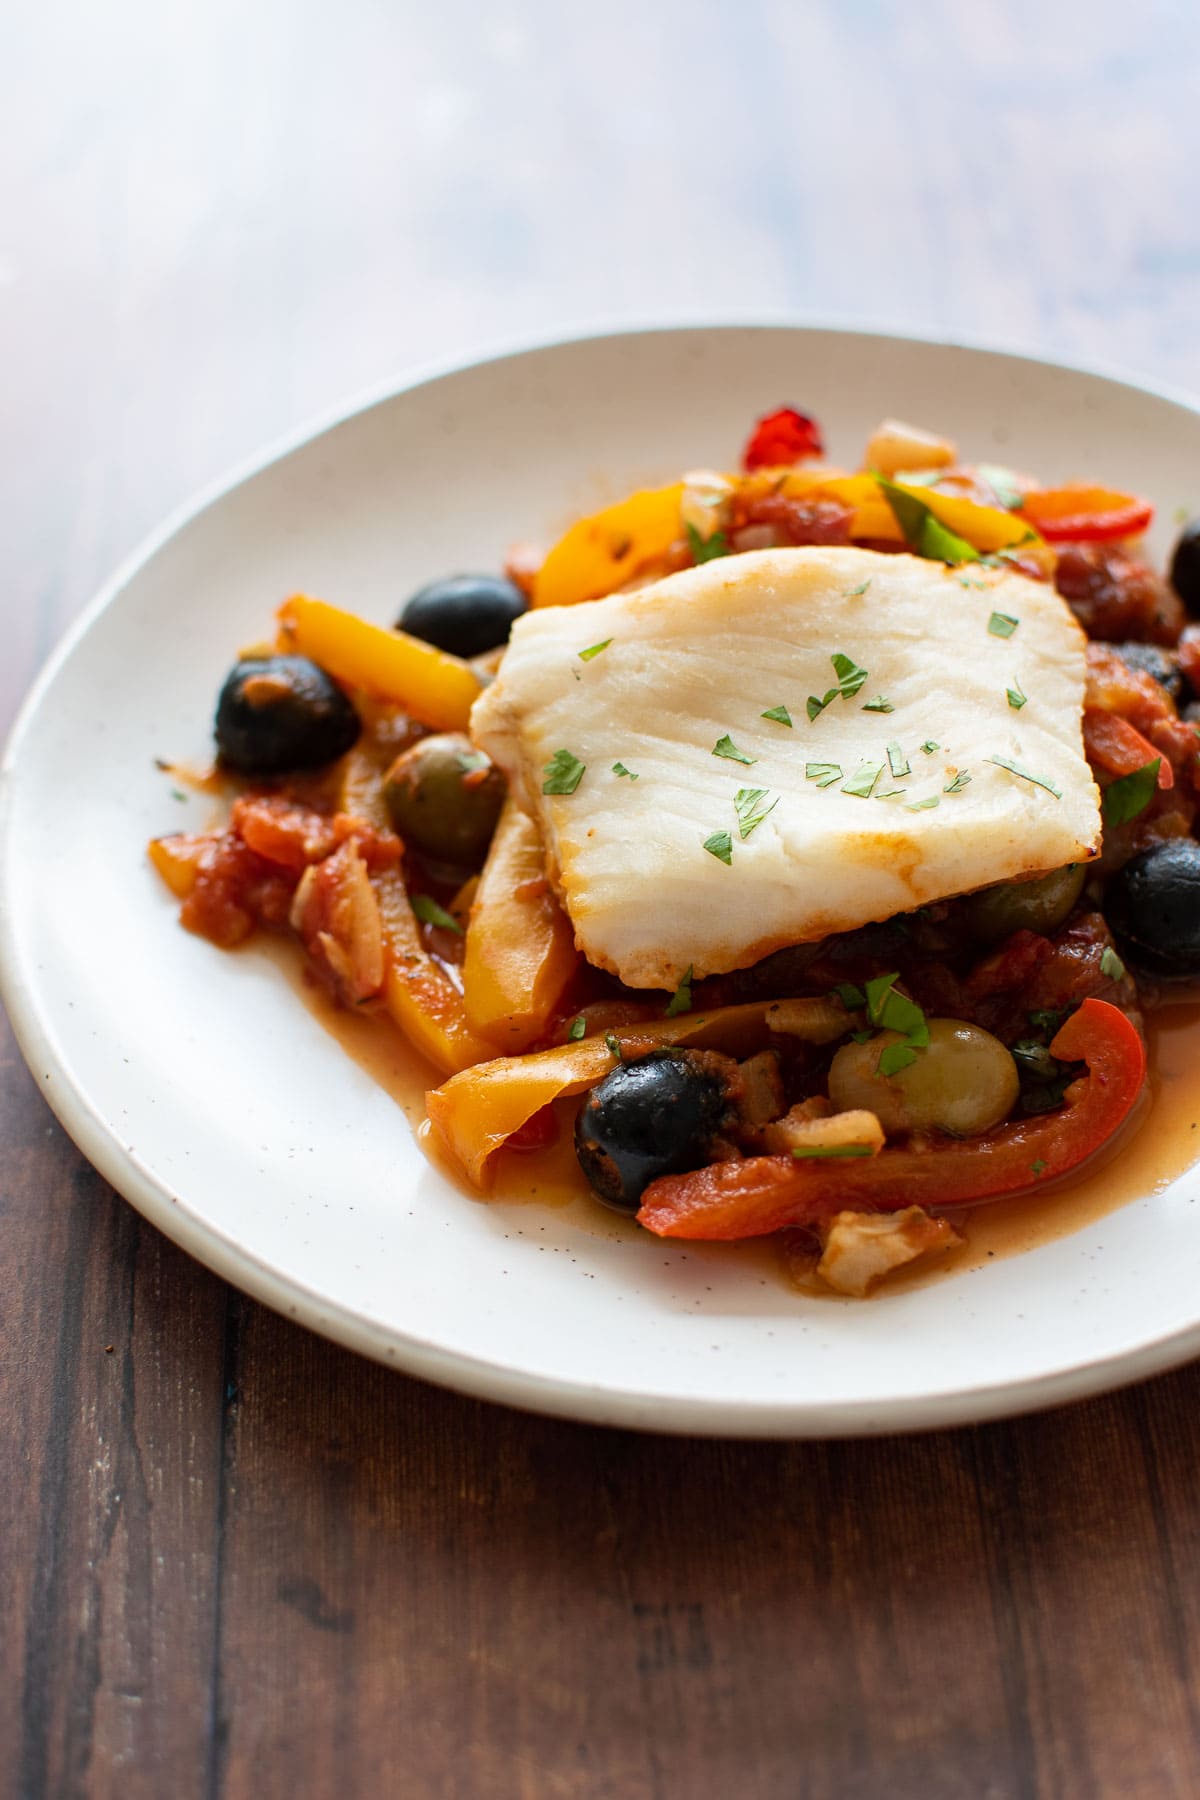 Baked hake and vegetables on a plate.